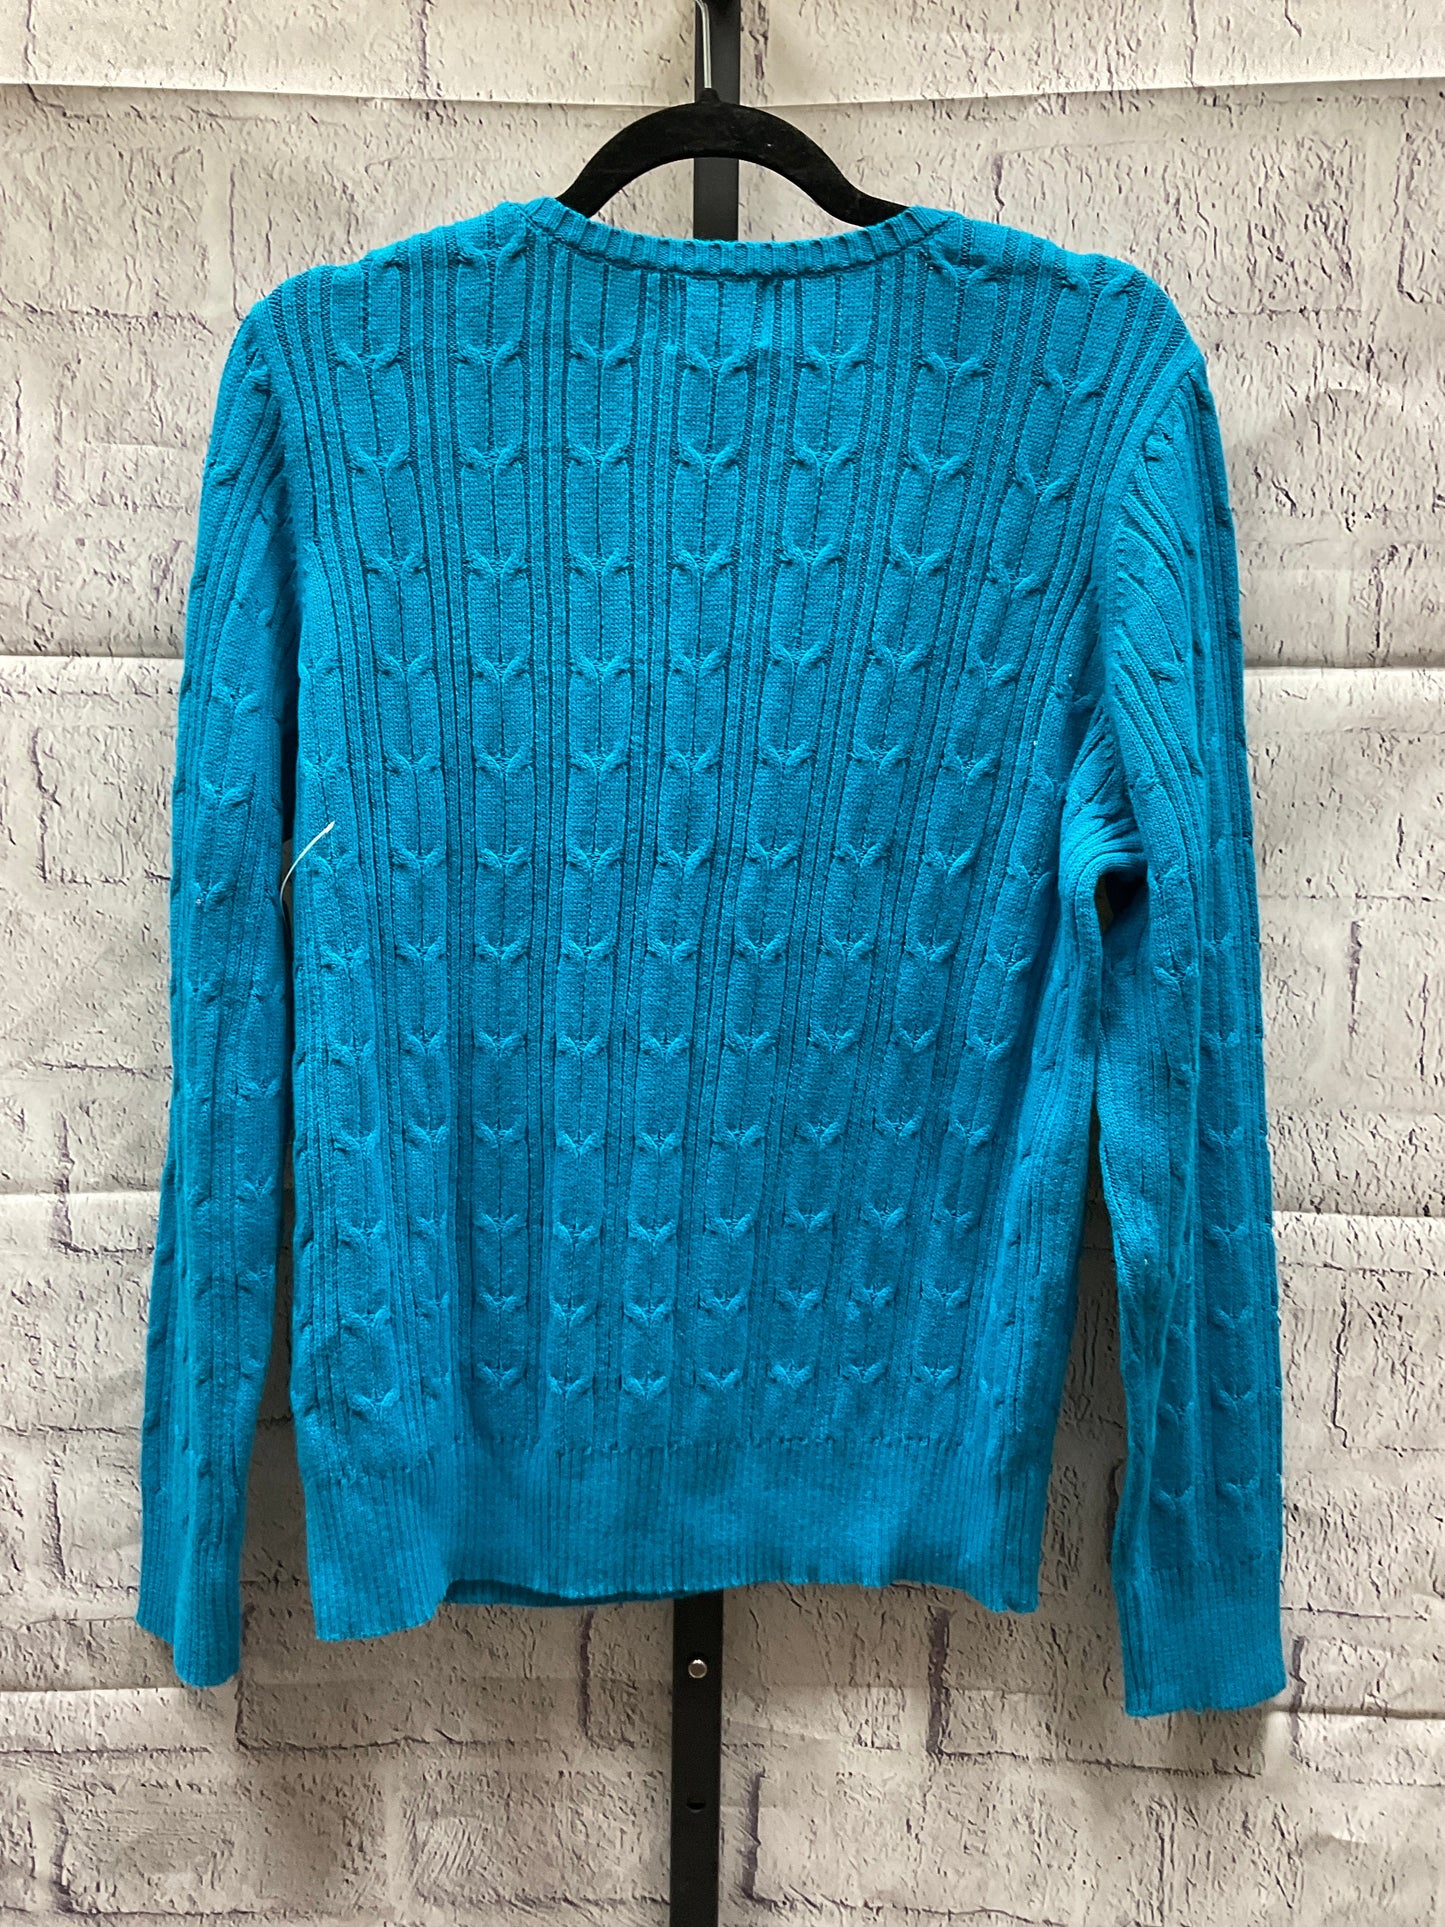 Sweater By St Johns Bay  Size: Xl